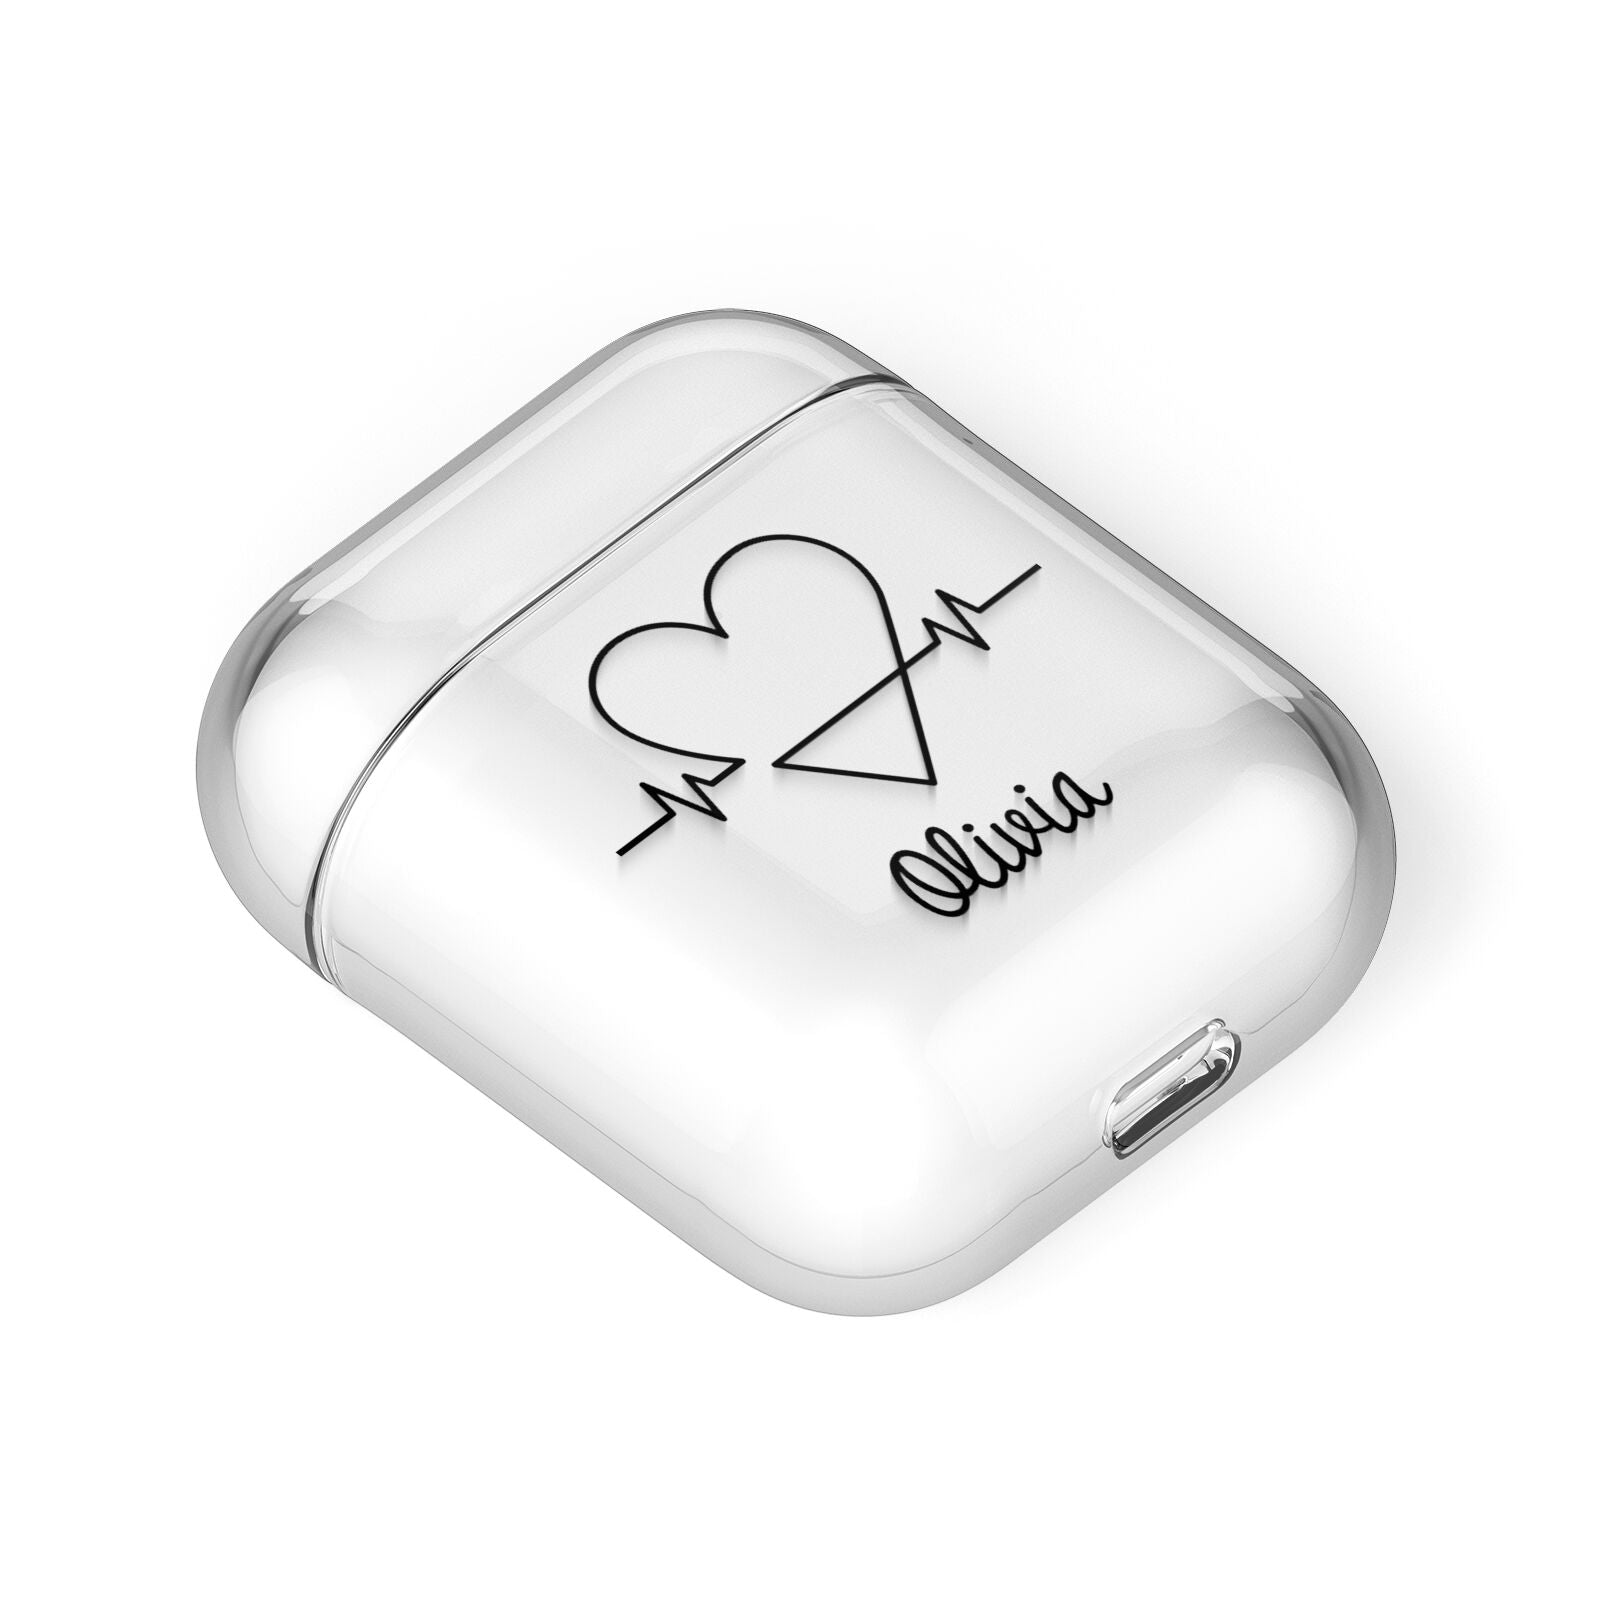 ECG Effect Heart Beats with Name AirPods Case Laid Flat